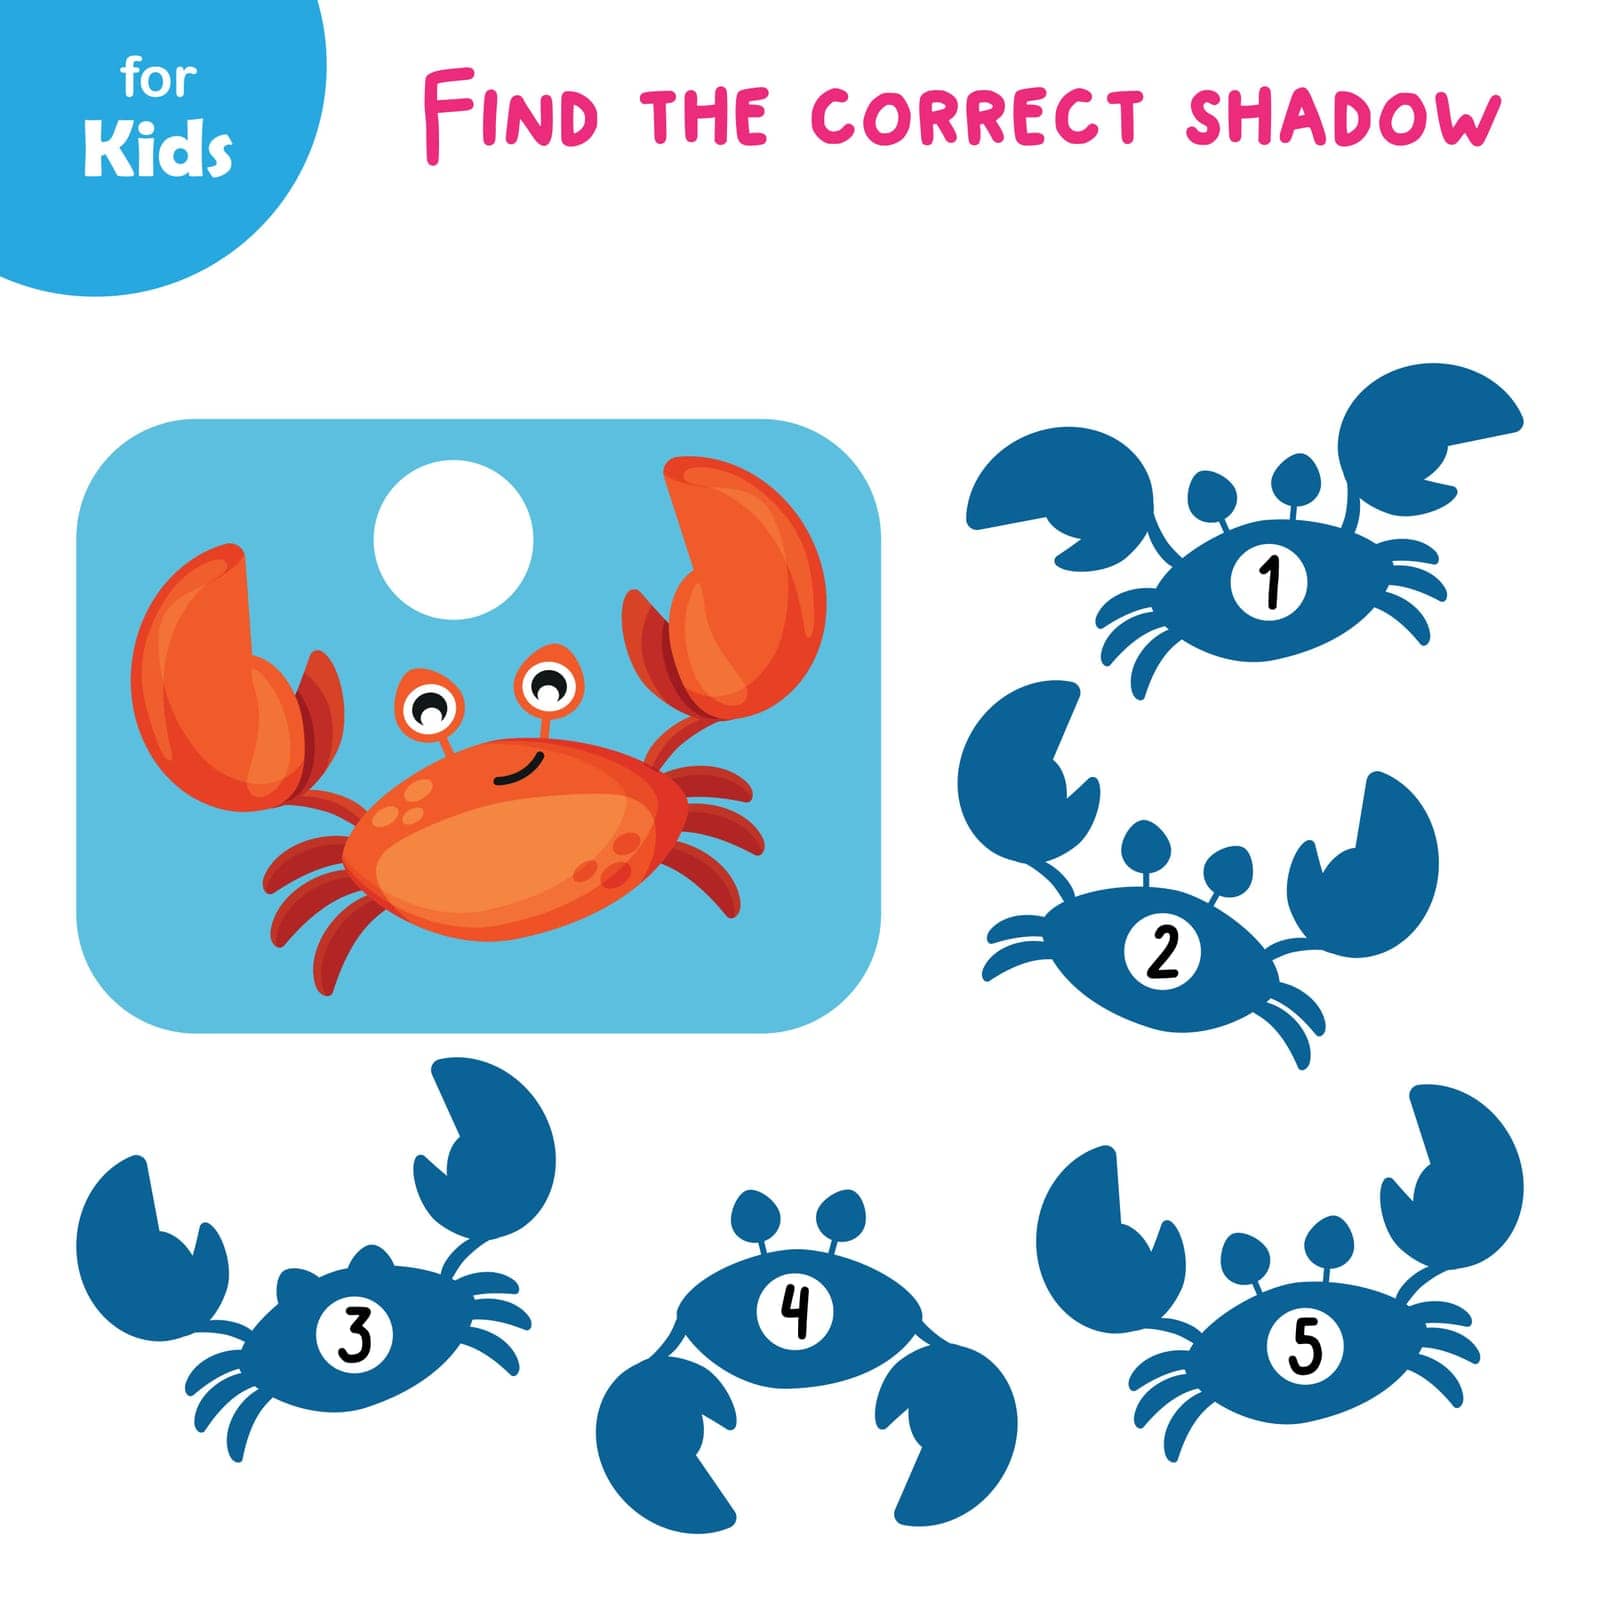 A Series Of Educational Games On The Marine Theme Gather A Shadow For The Crab. Introduces Children To Marine Animals. An Interactive, Fun Activity That Helps Kids Improve Their Powers Of Observation